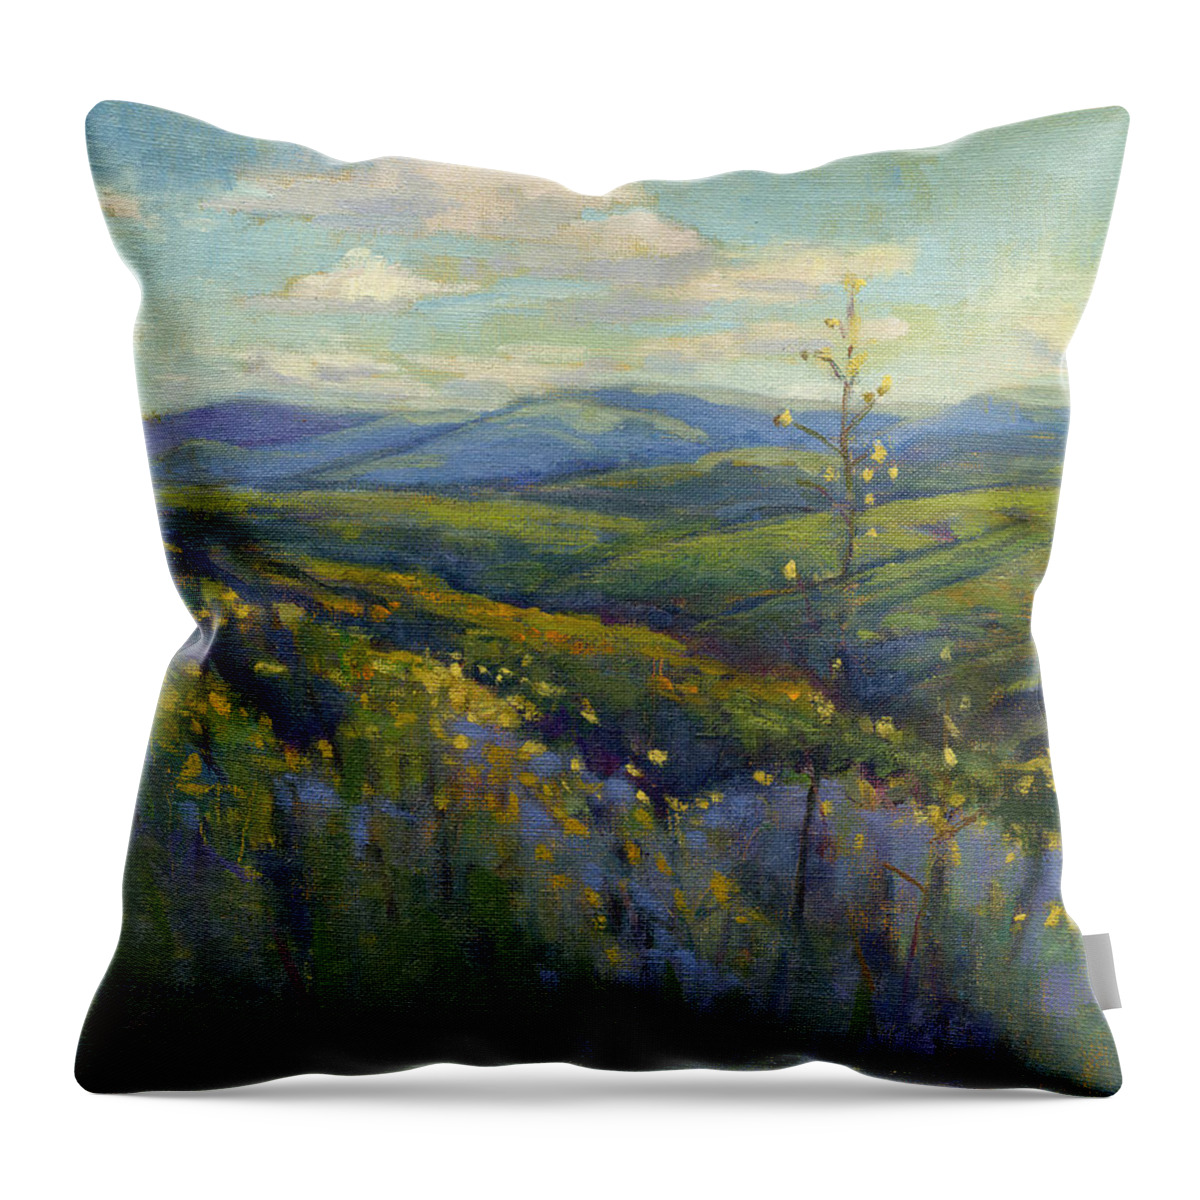 California Throw Pillow featuring the painting Super Bloom 4 by Konnie Kim